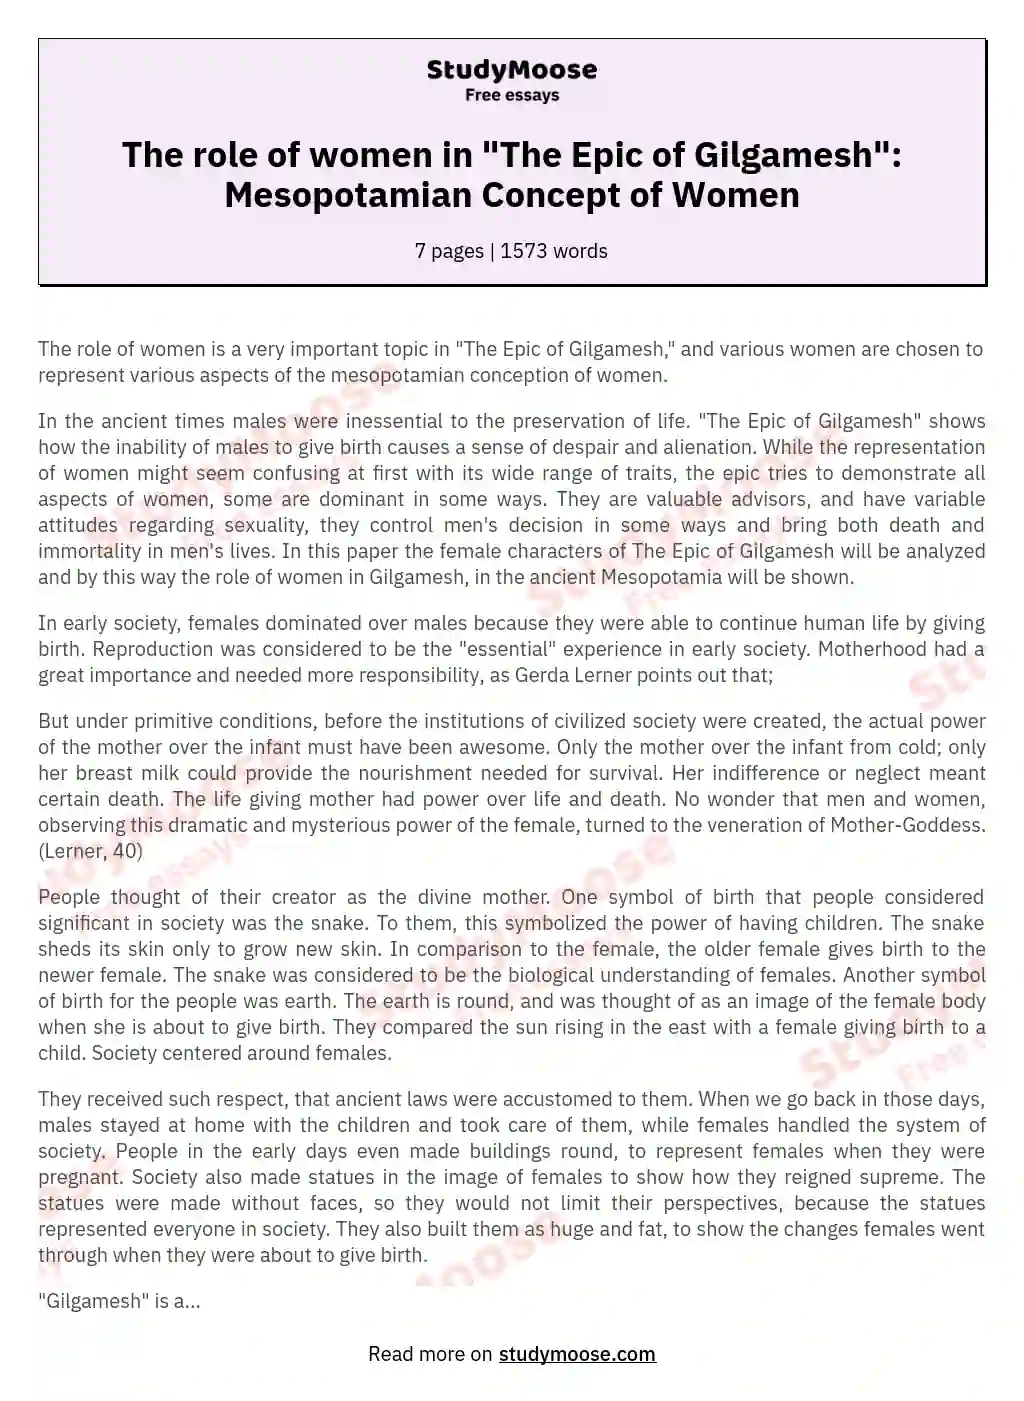 The role of women in "The Epic of Gilgamesh": Mesopotamian Concept of Women